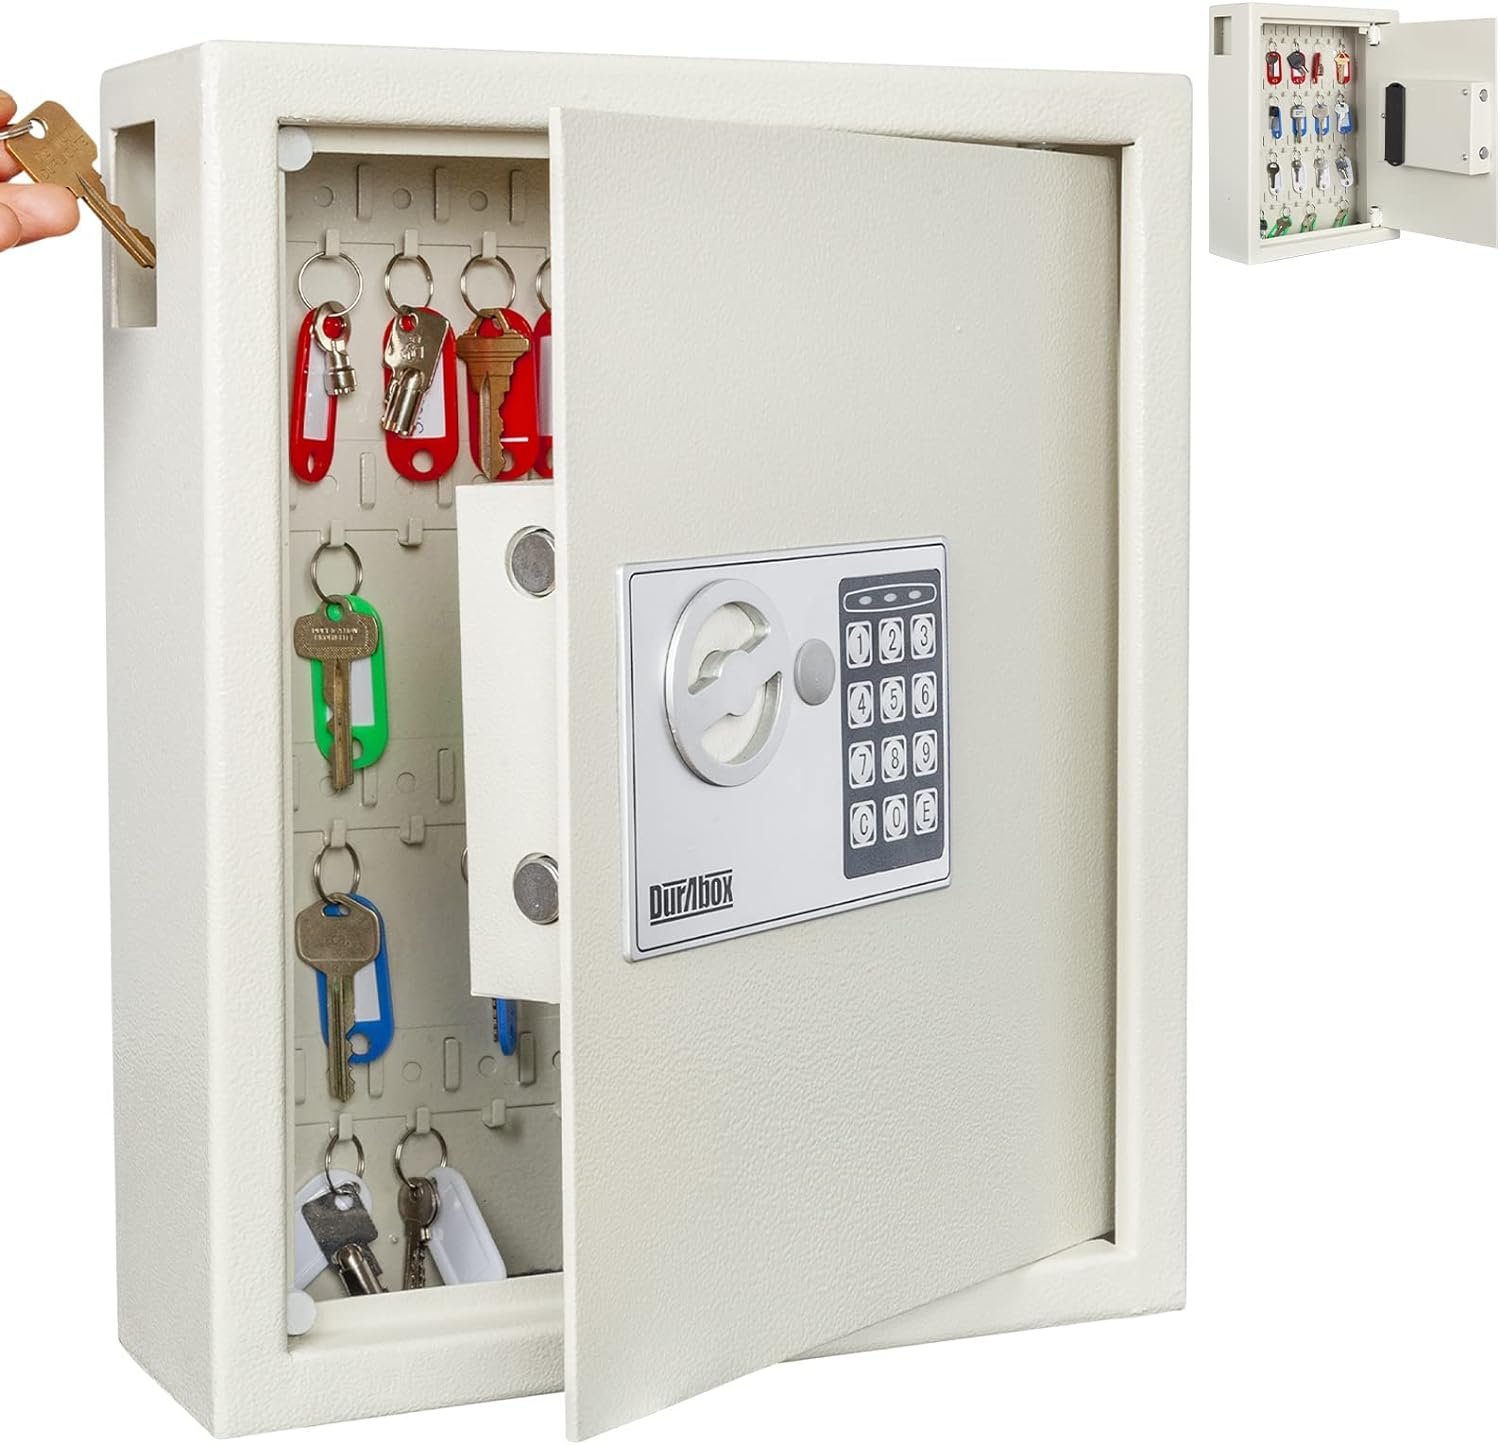 40 Keys Cabinet with Digital Lock Review